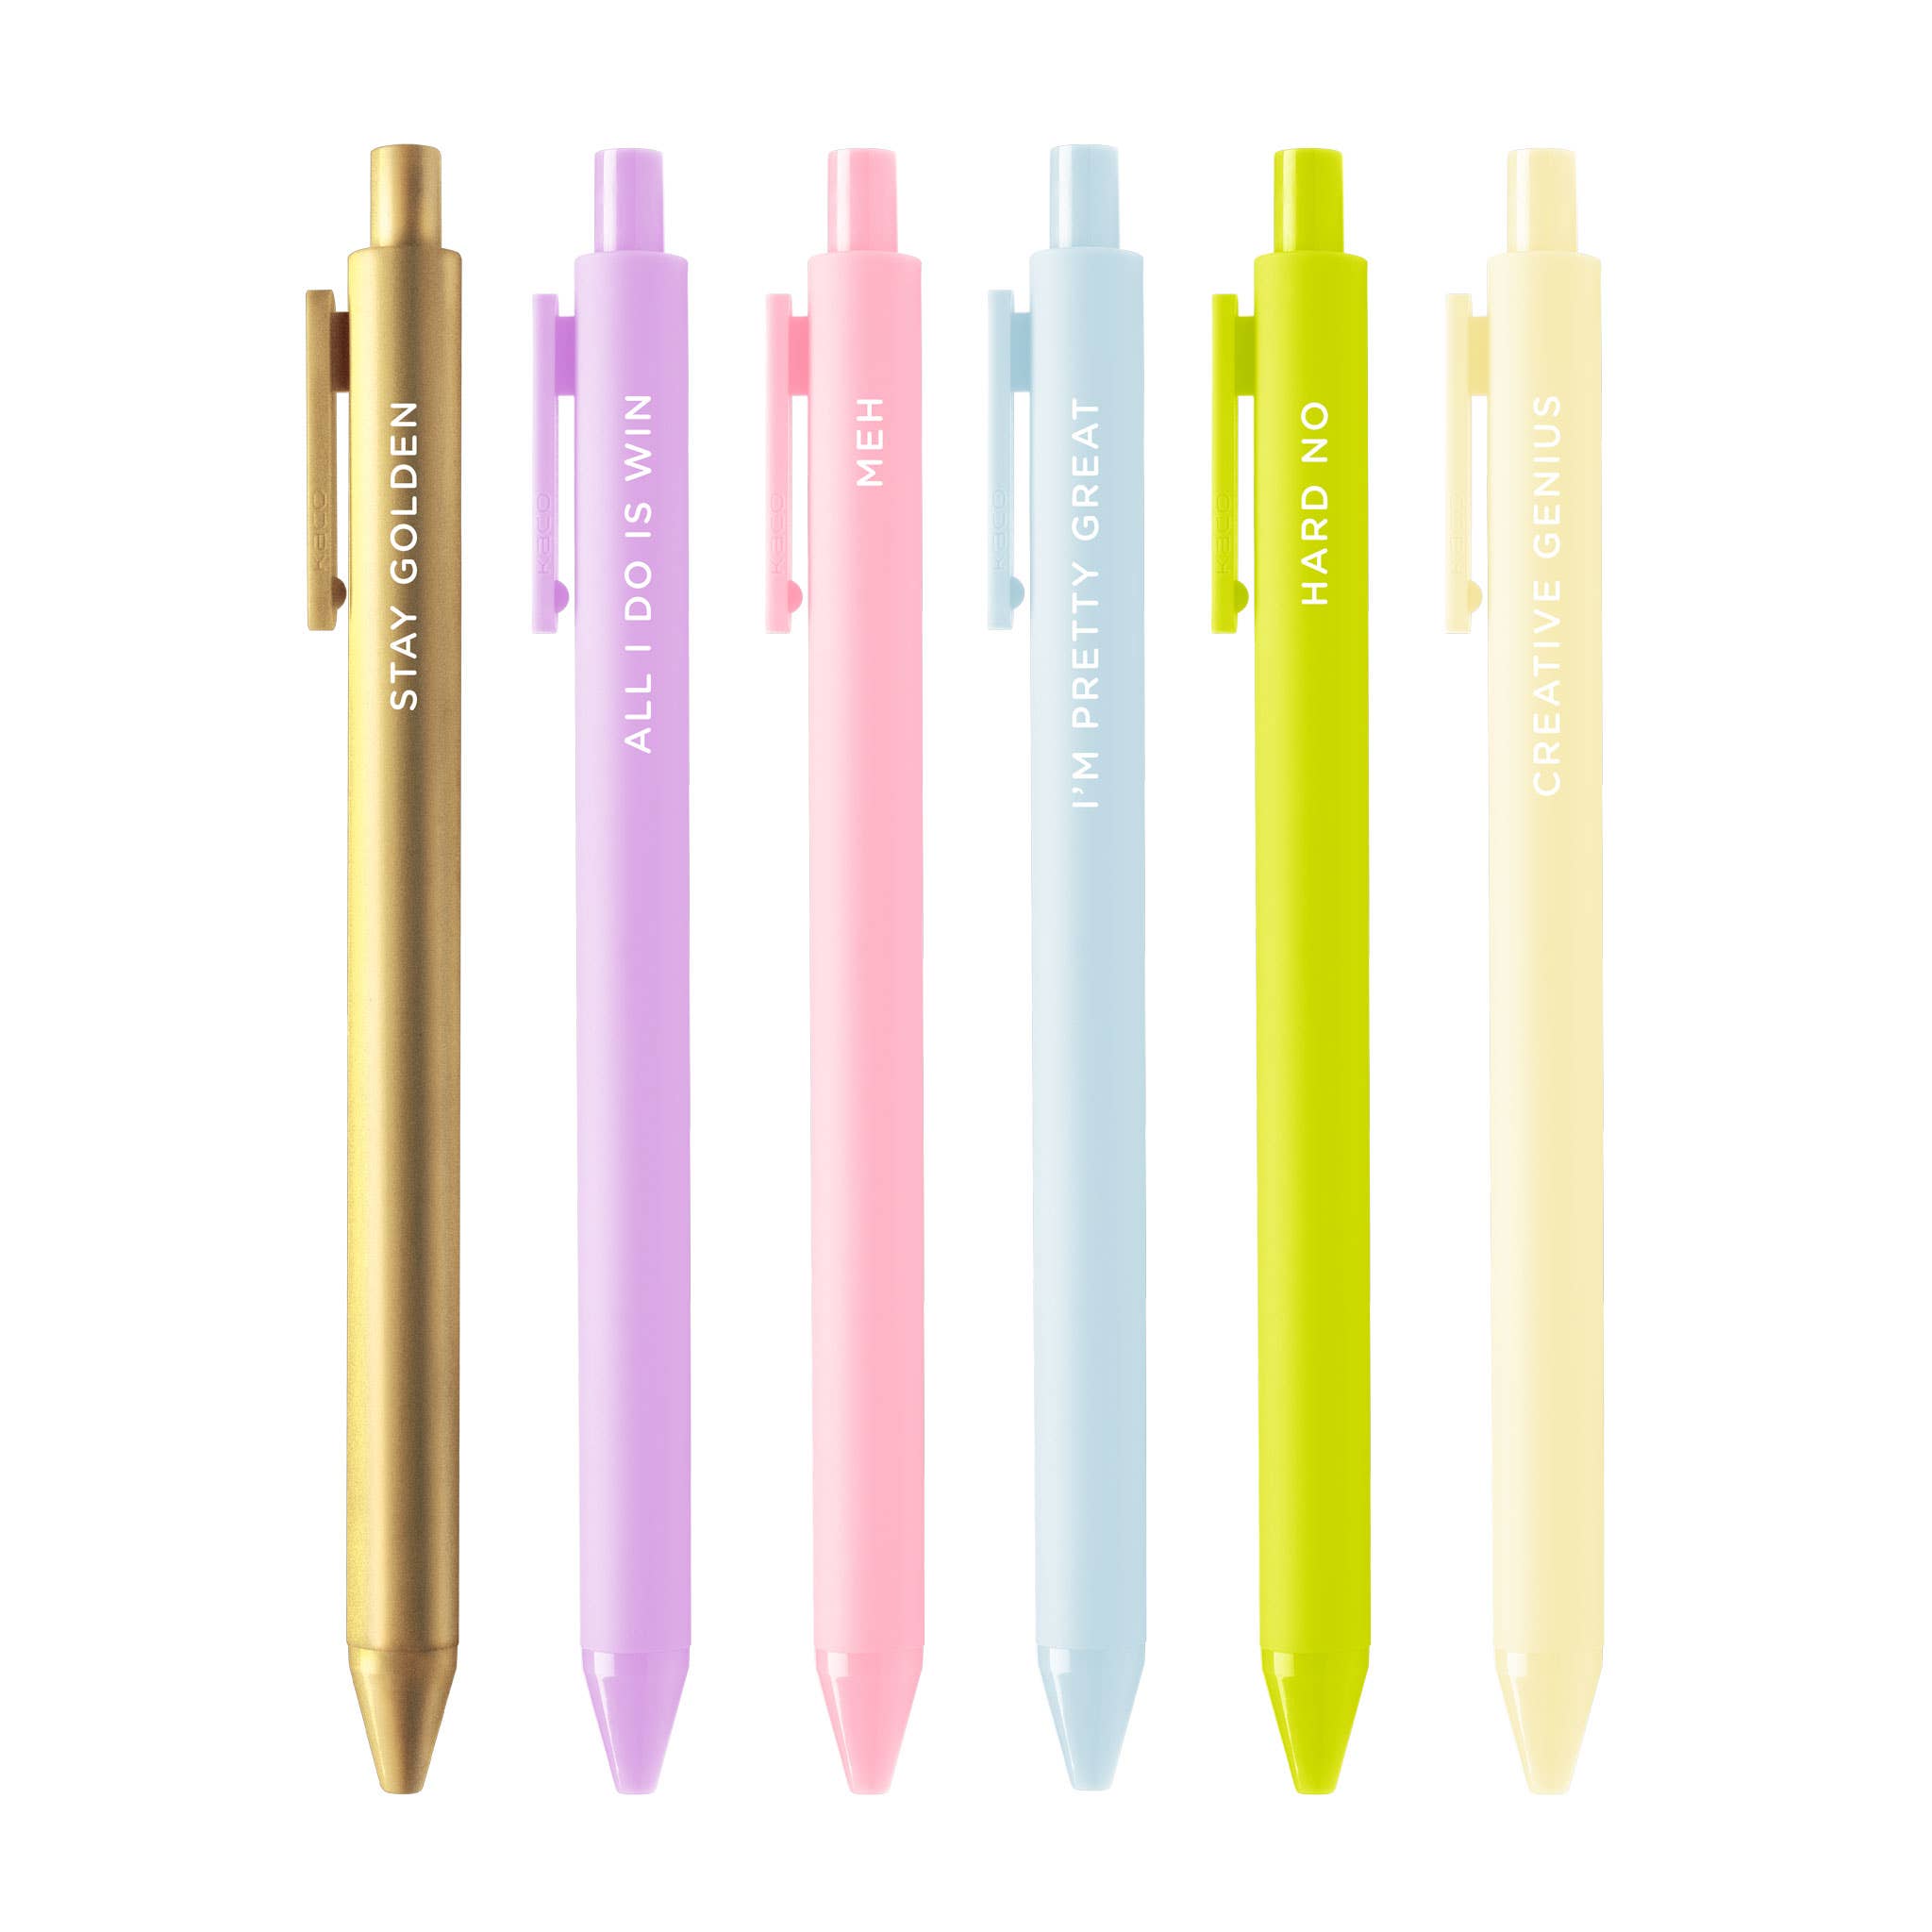 "All I Do Is Win" Jotter Pens - Set of 6